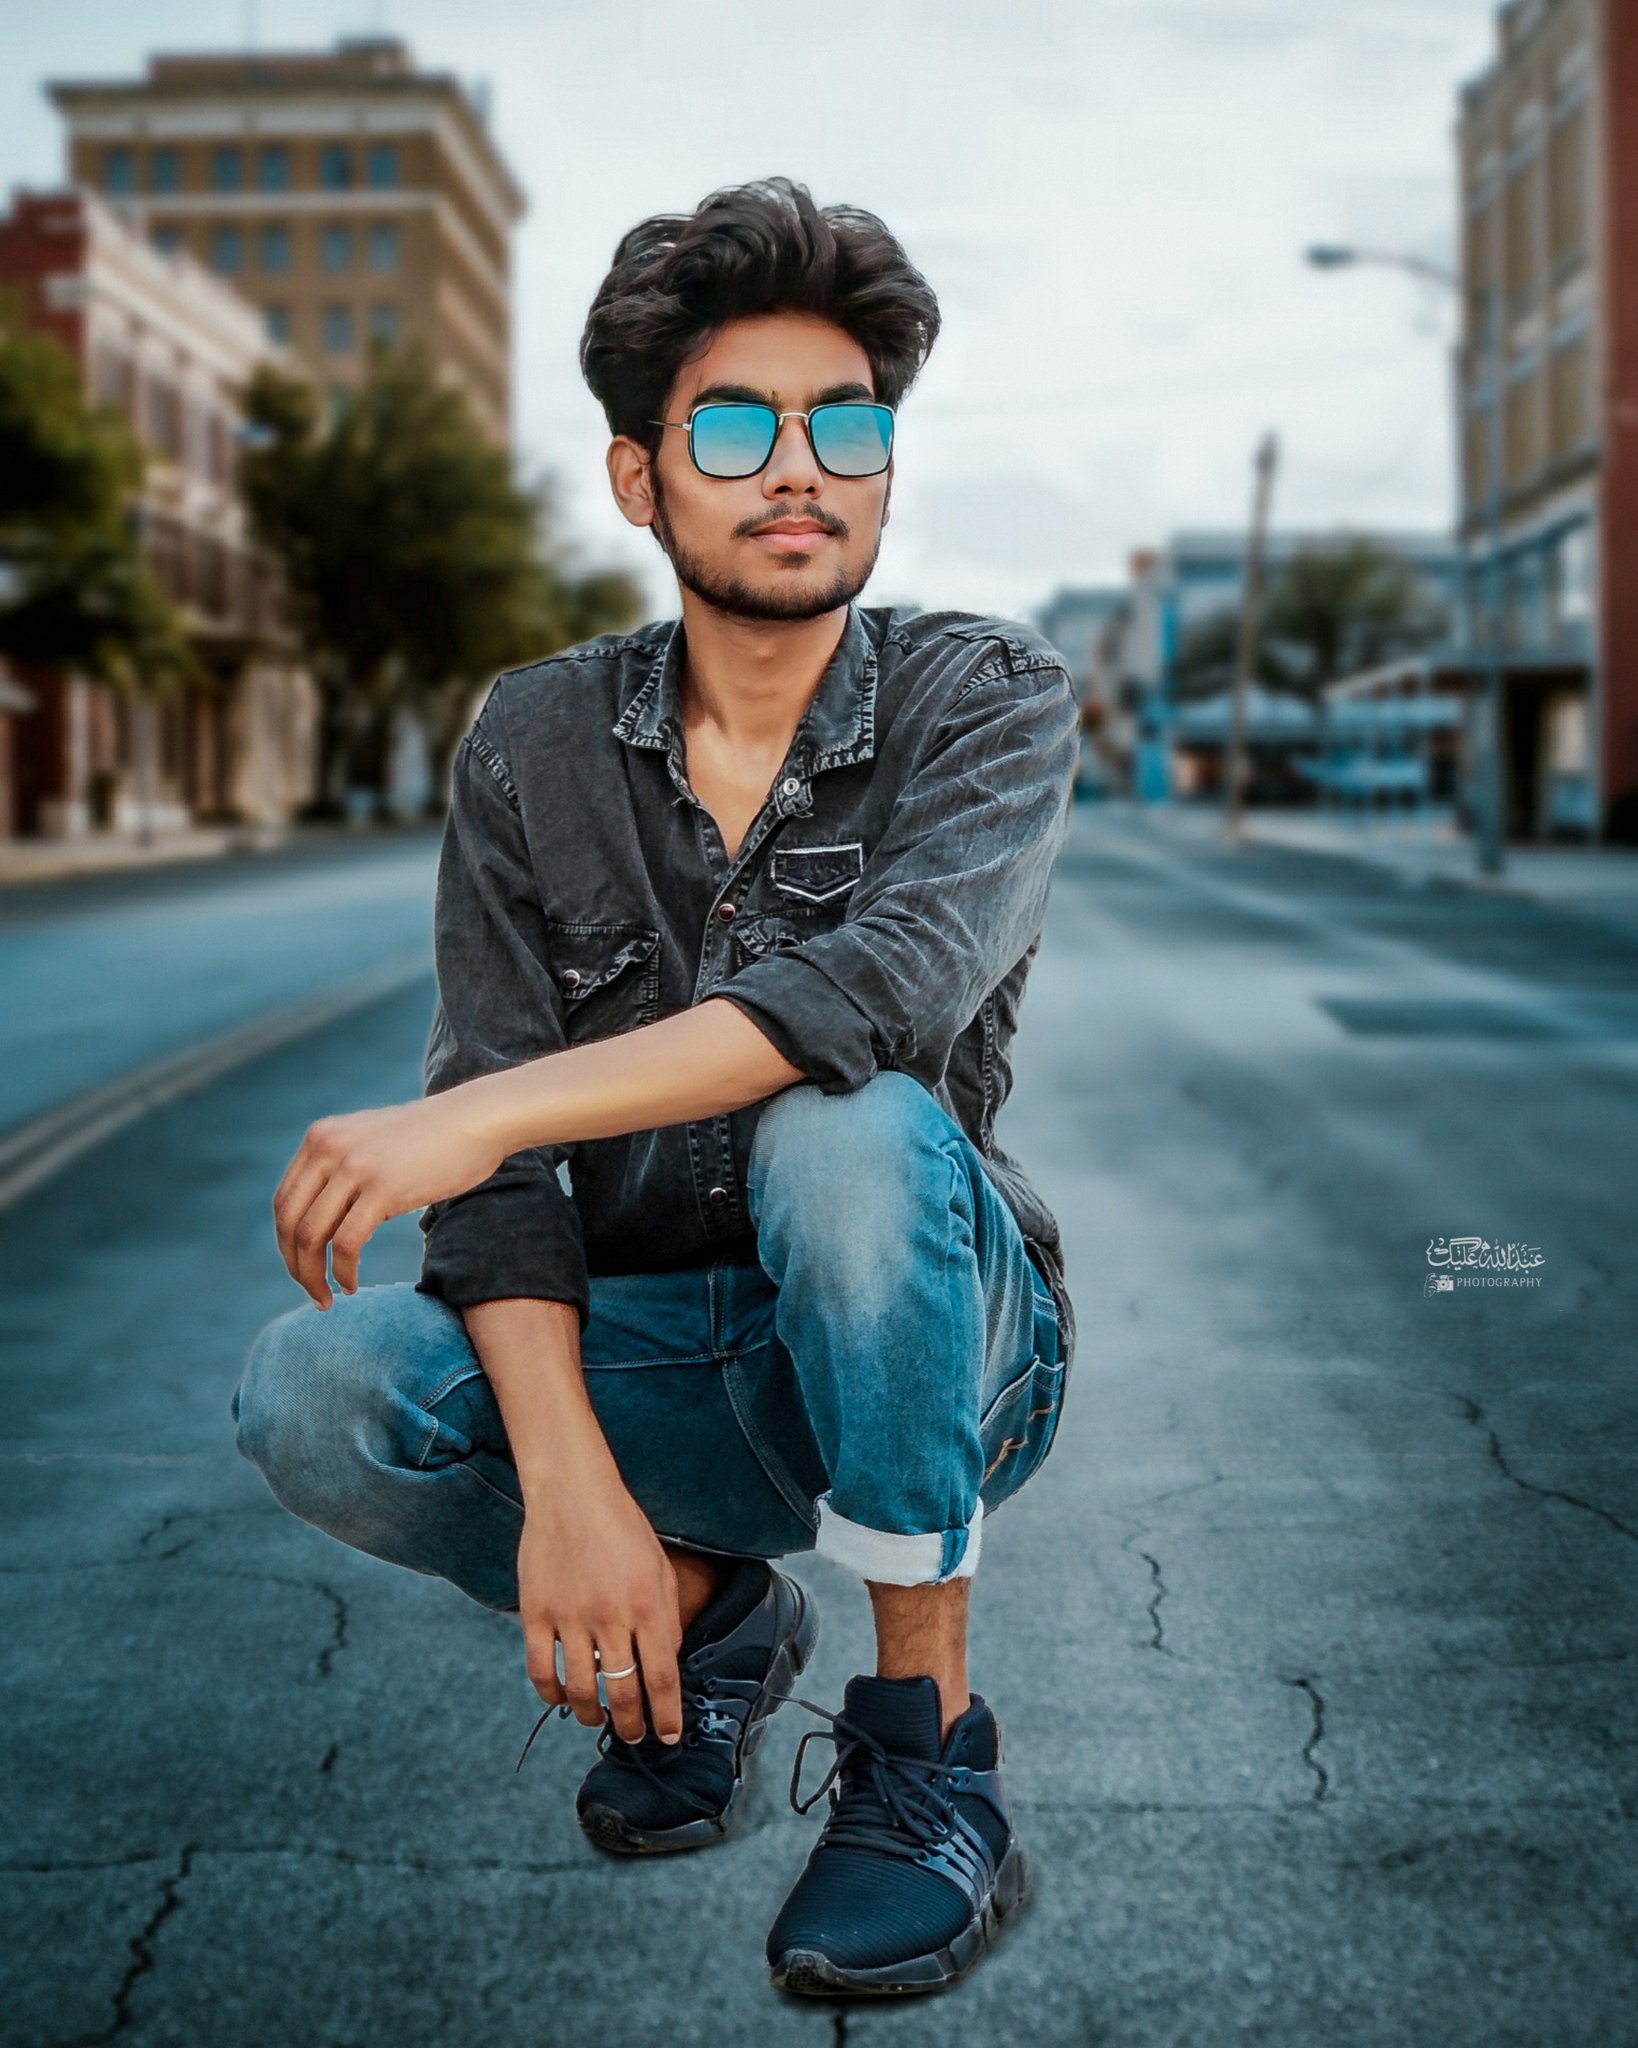 𝐃 𝐄 𝐄 𝐏 𝐀 𝐊 𝐉 𝐎 𝐒 𝐇 𝐈 on Instagram: “I don't have an attitude!  …Just a personality that you c… | Mens photoshoot poses, Photoshoot pose boy,  New